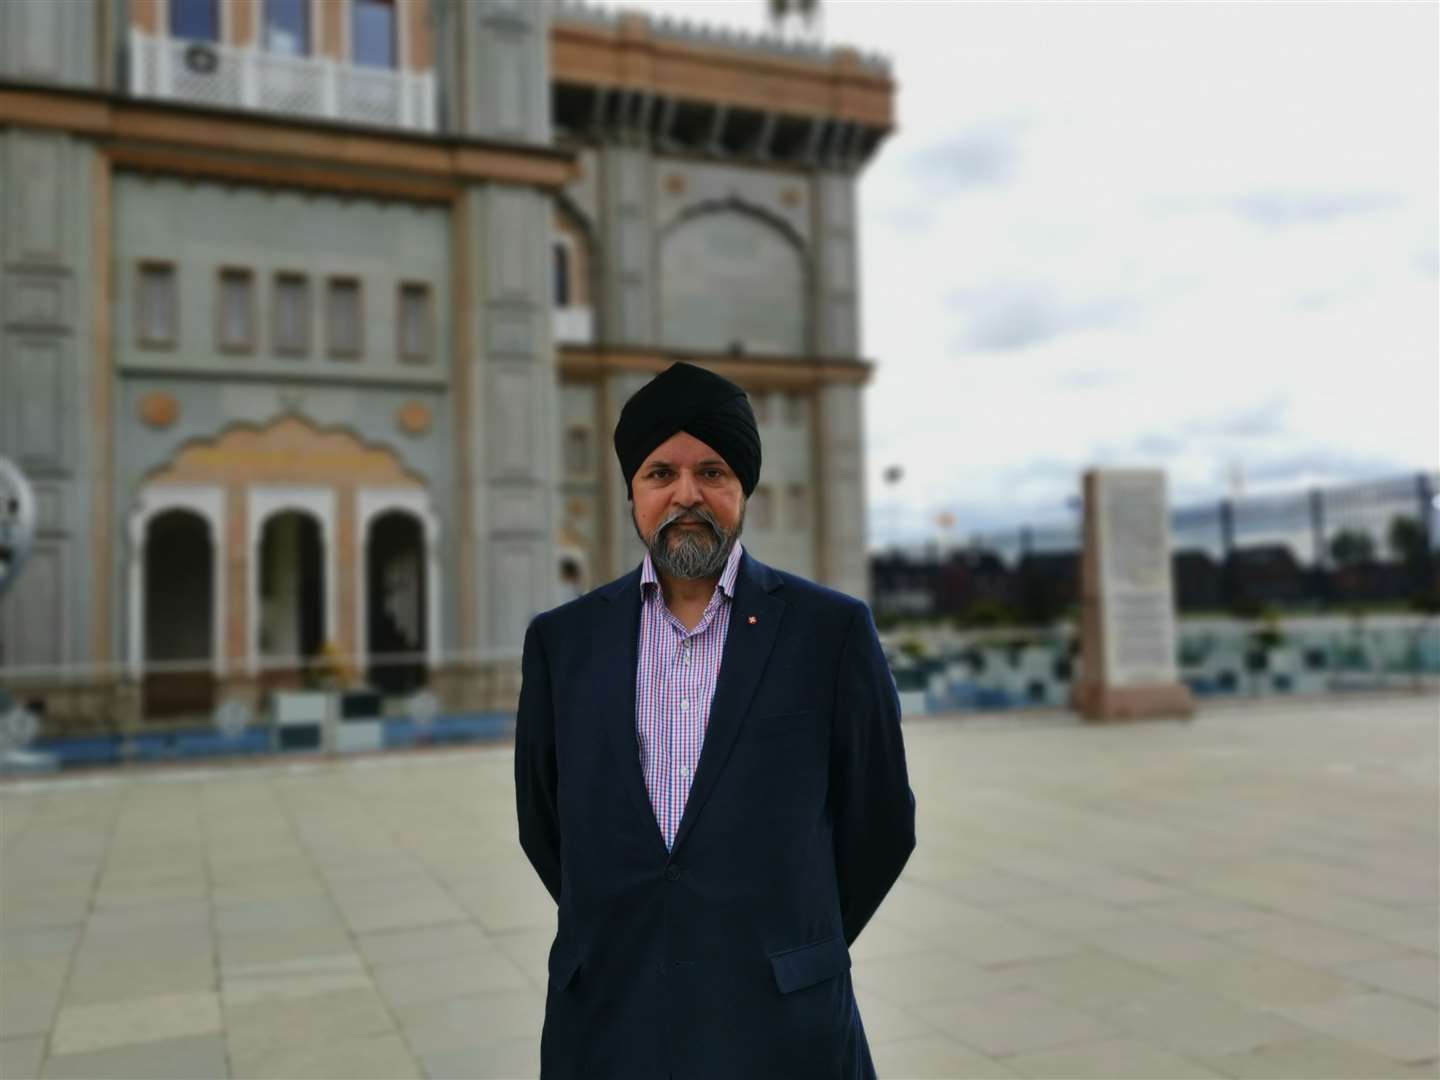 Jagdev Singh Virdee has helped lead the project to send ventilators out to north India